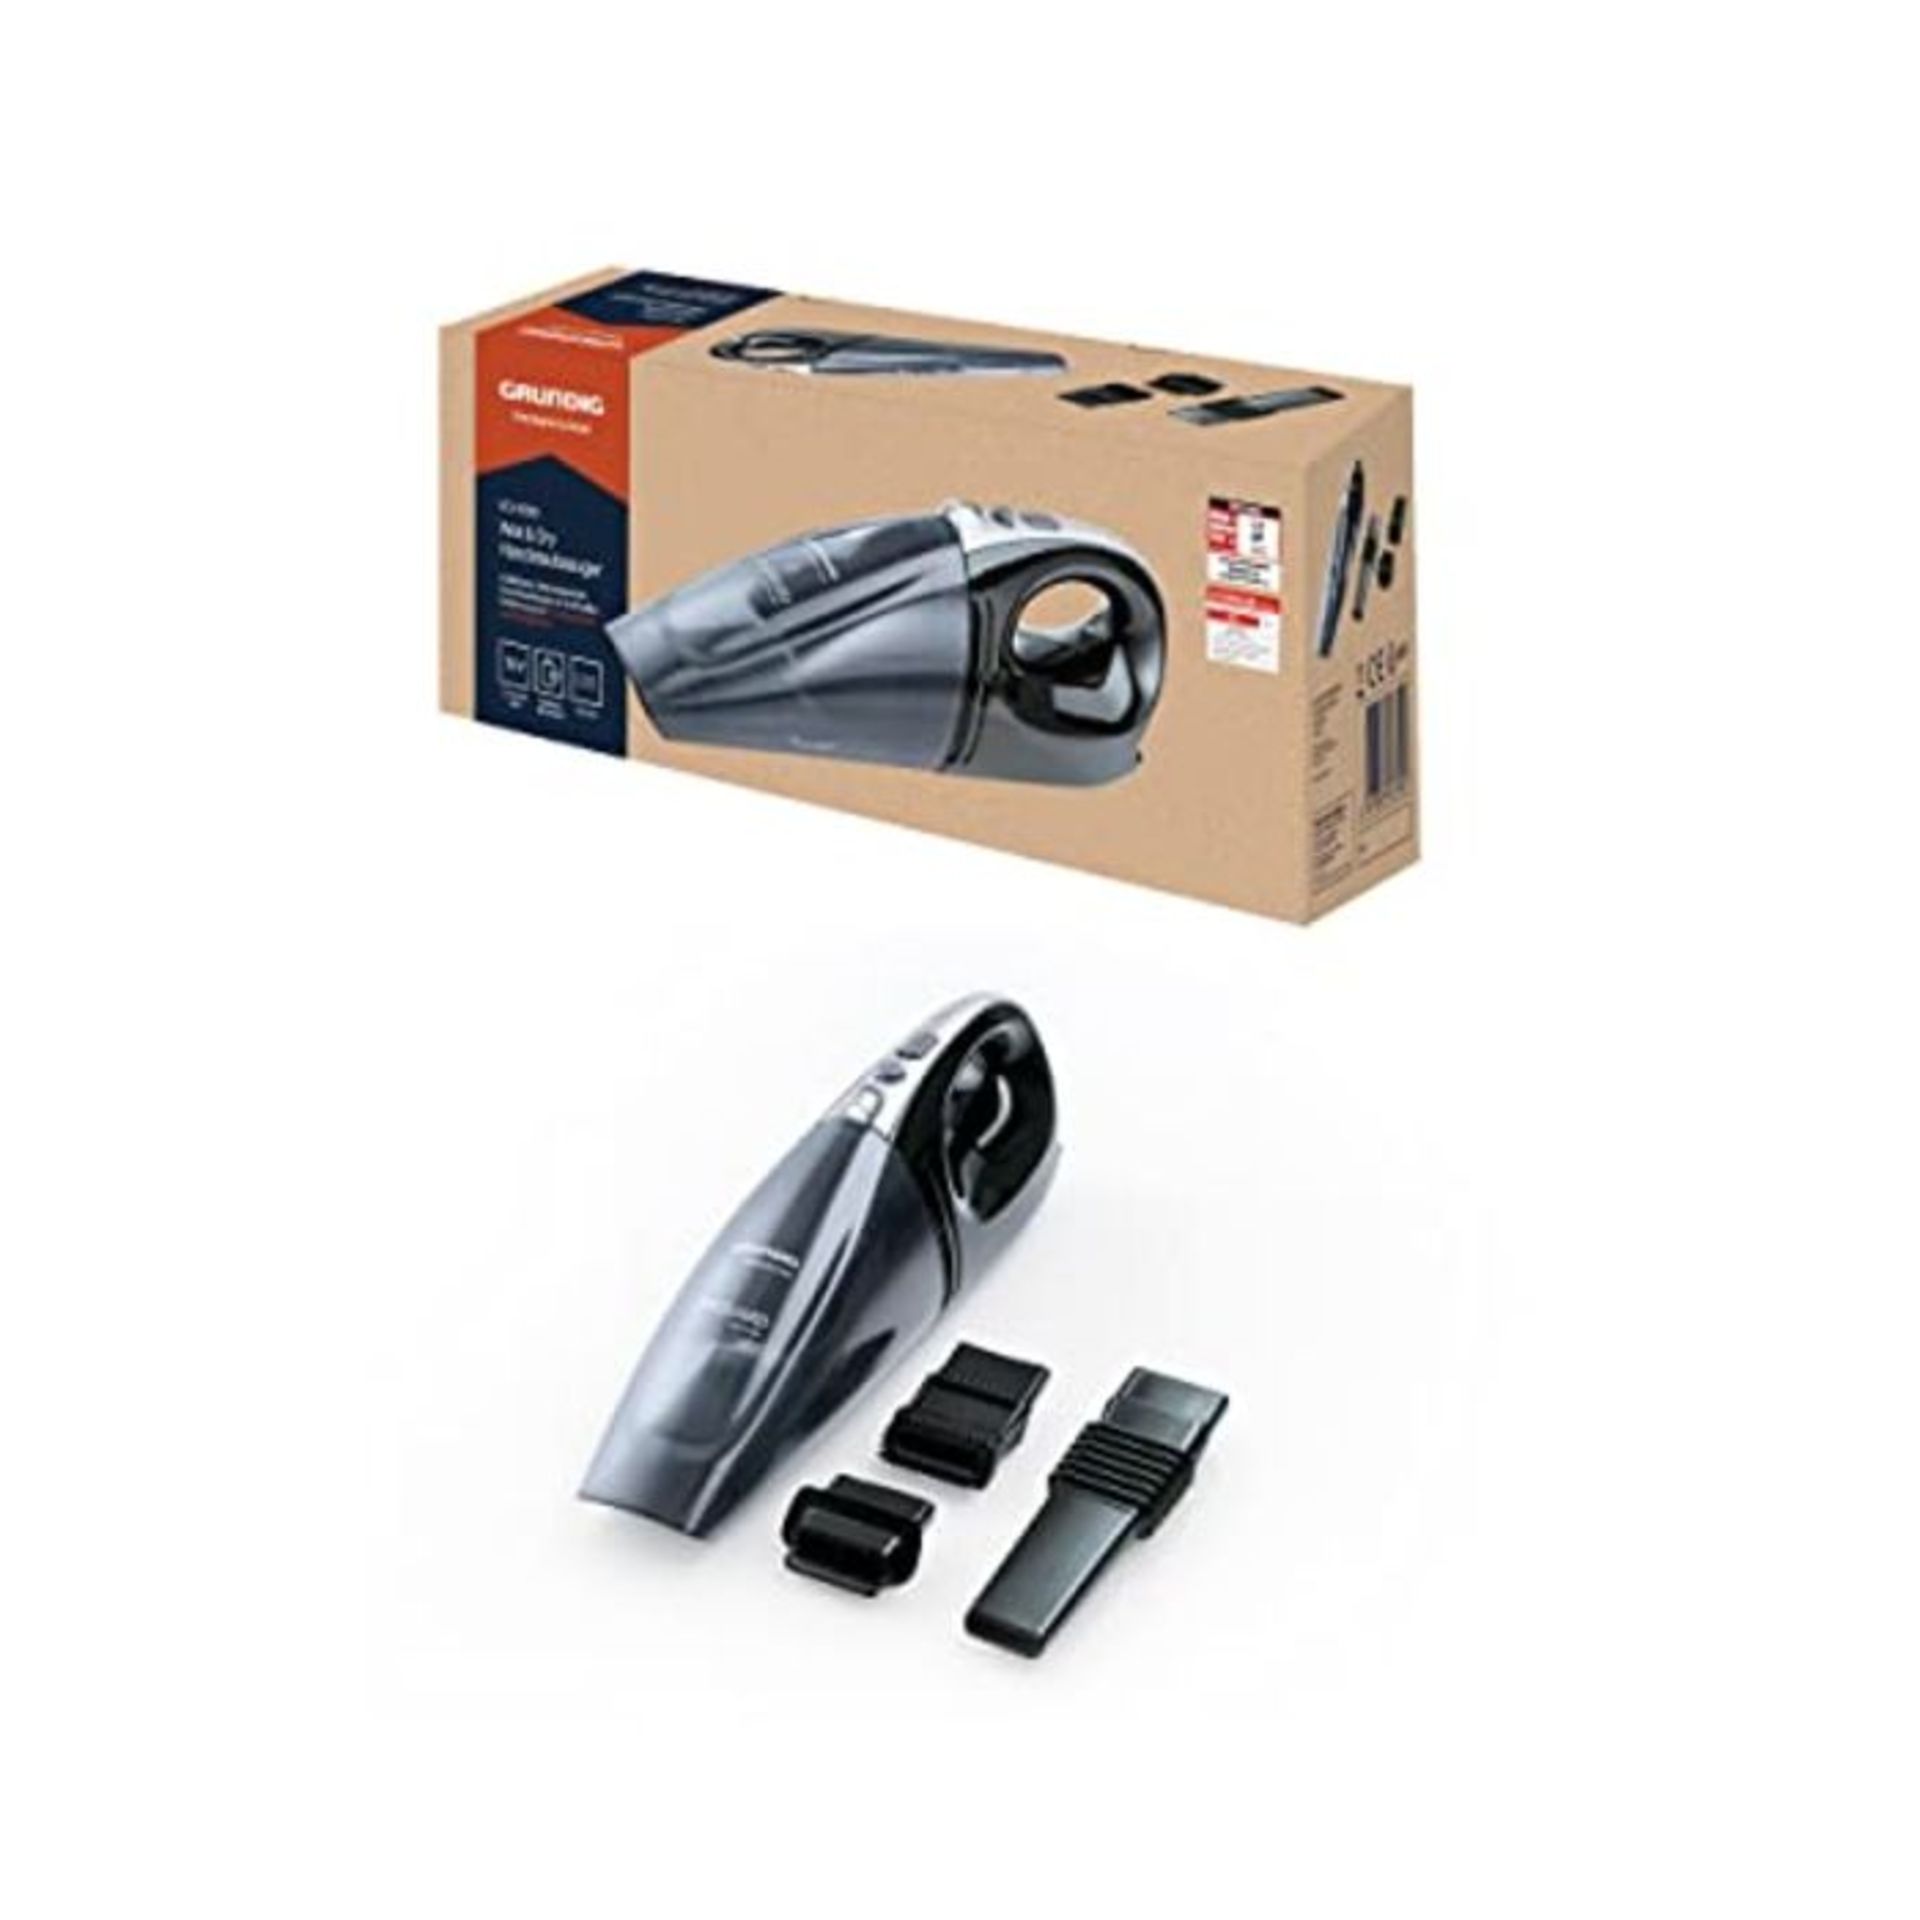 Grundig VCH 6130 portable vacuum cleaner- portable vacuum cleaners (Dry&Wet, Bagless,